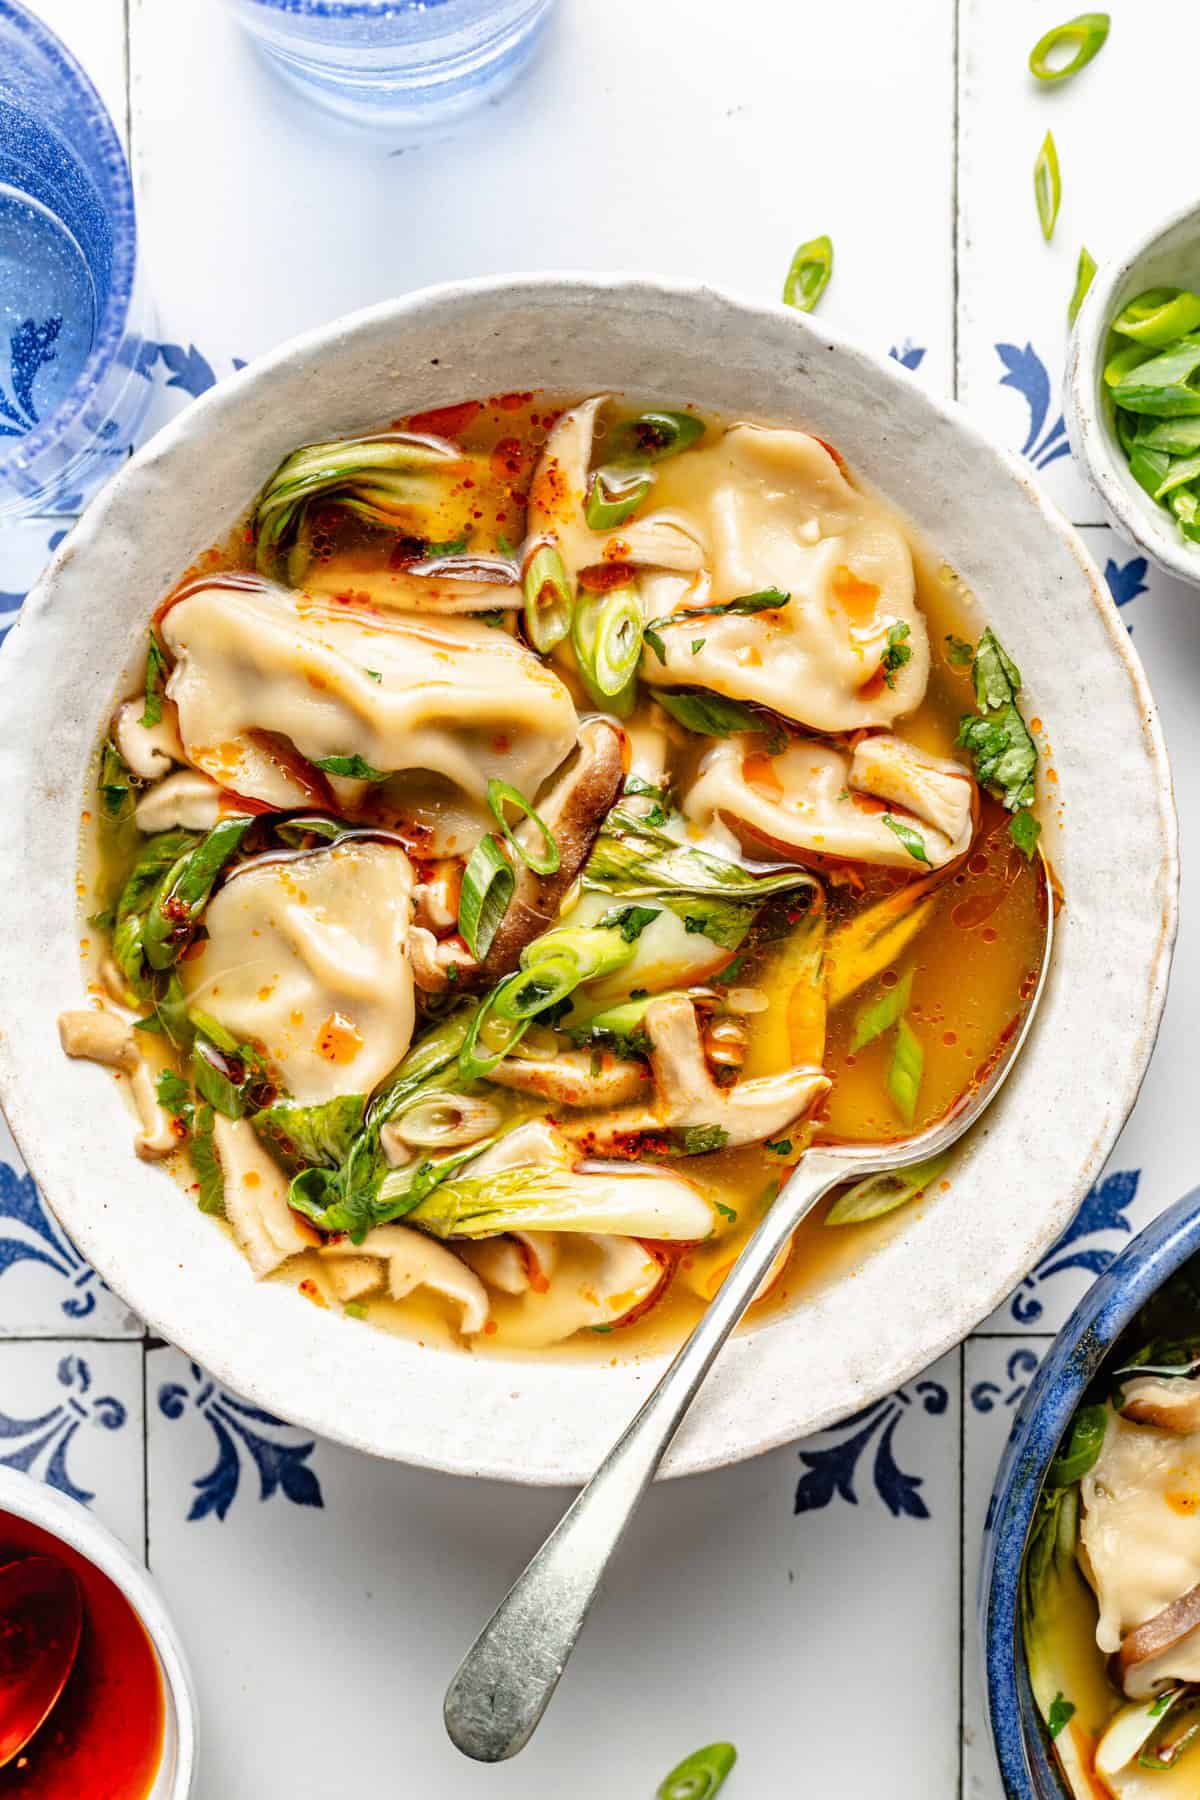 20-Minute Wonton Soup - The Defined Dish